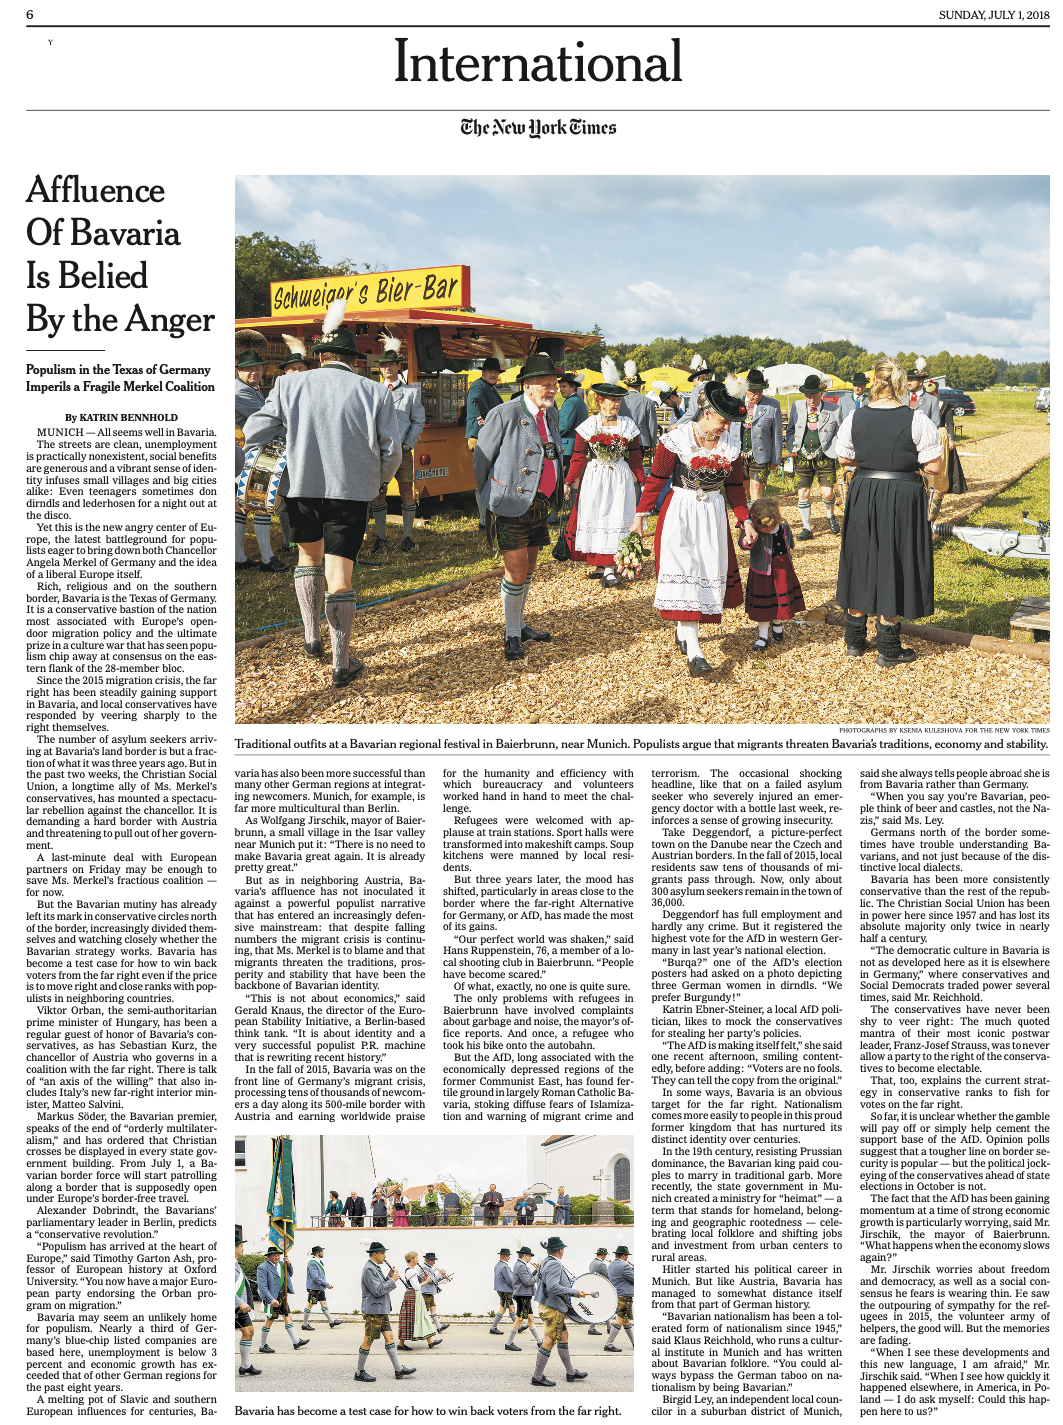  Publication:   The New York Times   Date: 01.07.2018   